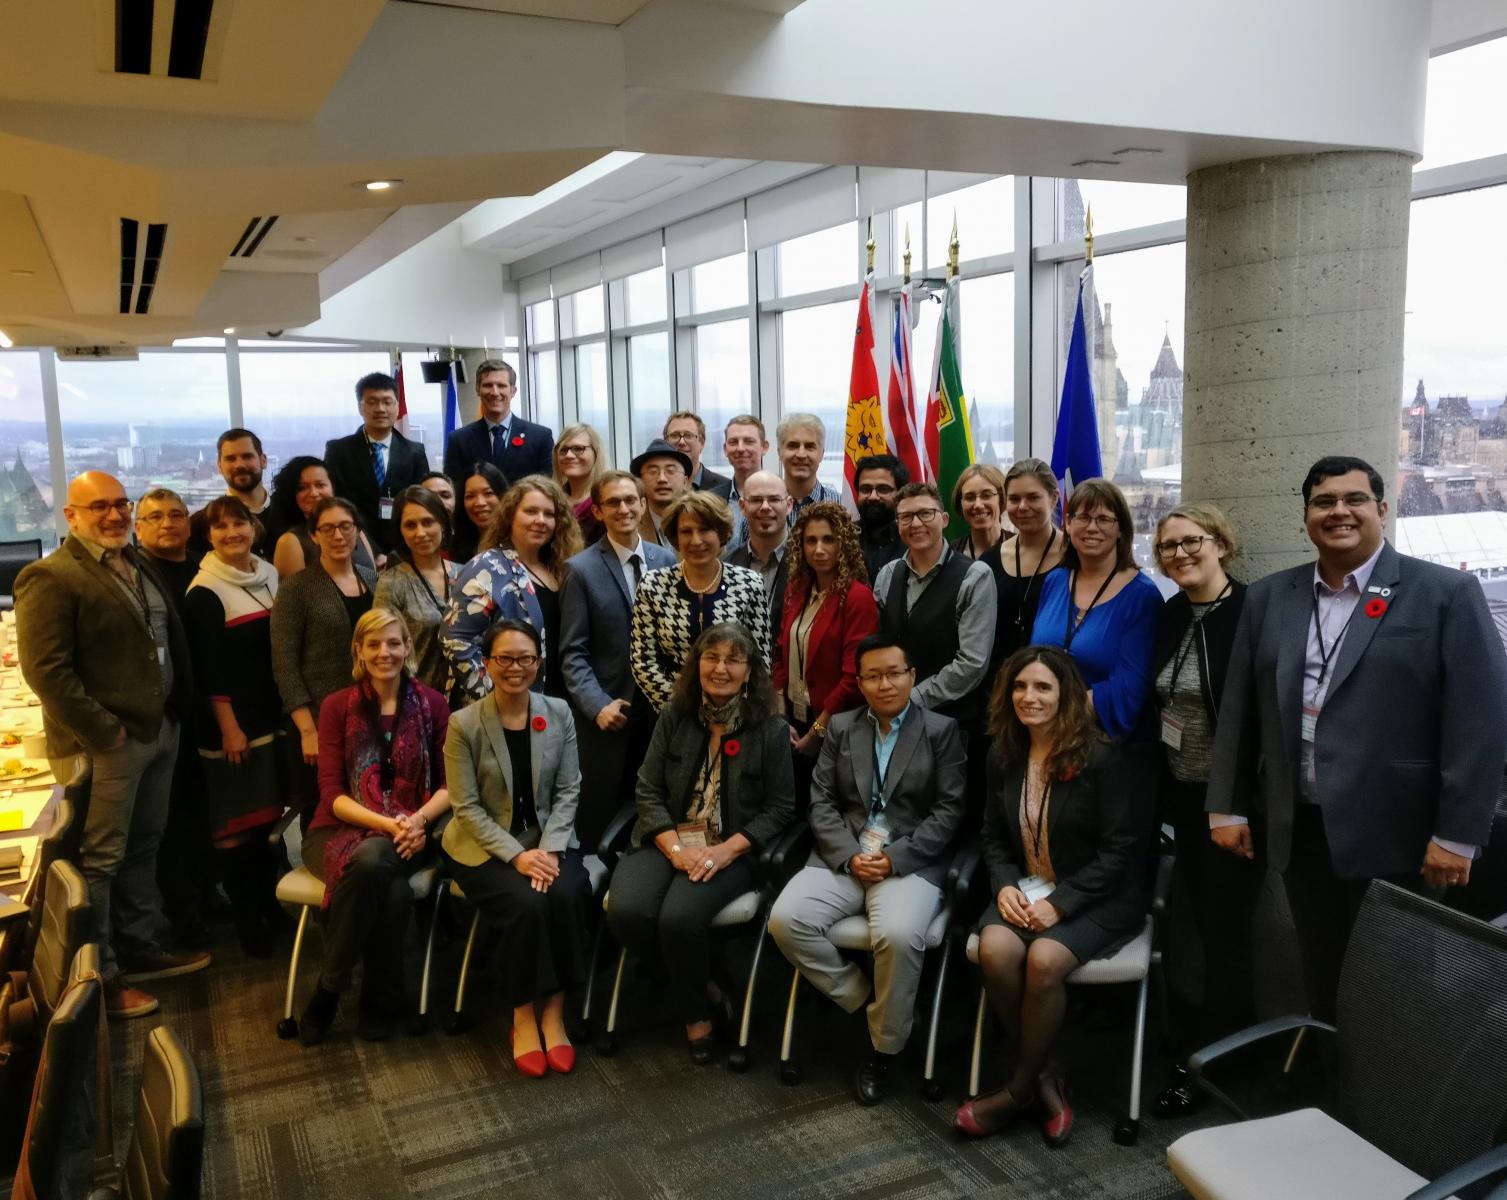 Group photo of all the Science Meets Parliament 2018 participants